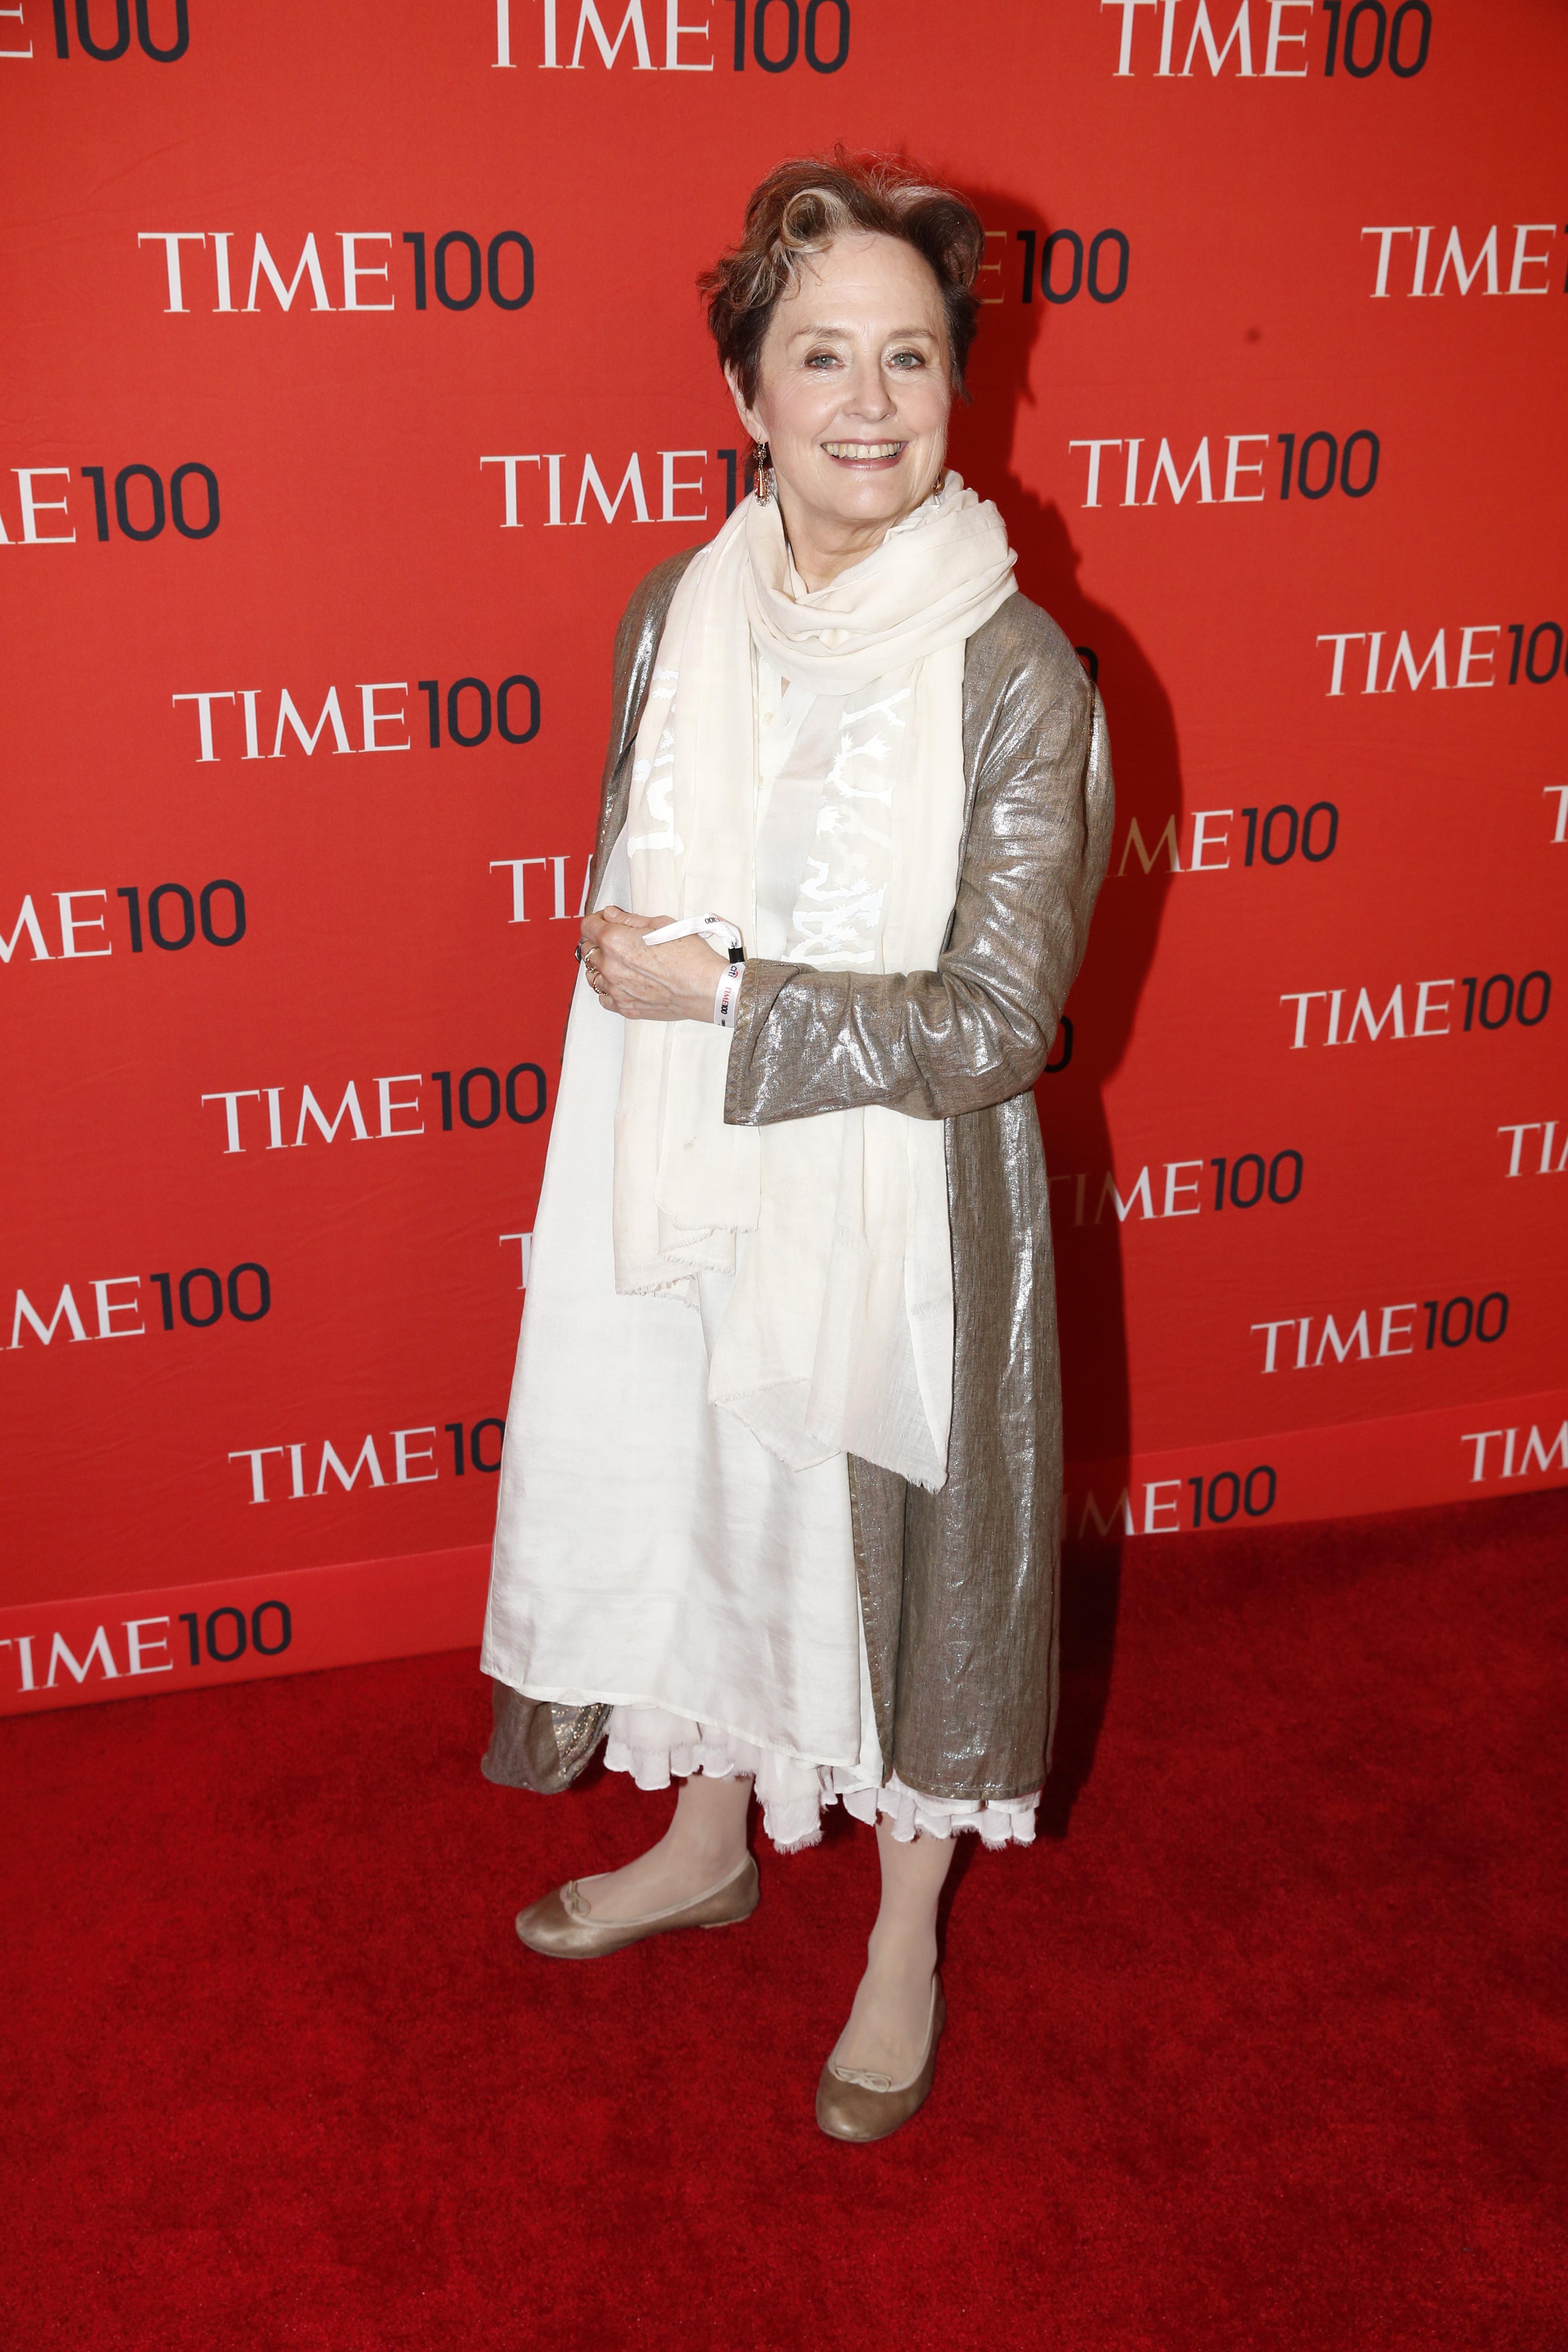 Alice Waters at the Time 100 Gala at Jazz at Lincoln Center in New York on April, 29, 2014. (Jonathan D. Woods for TIME)